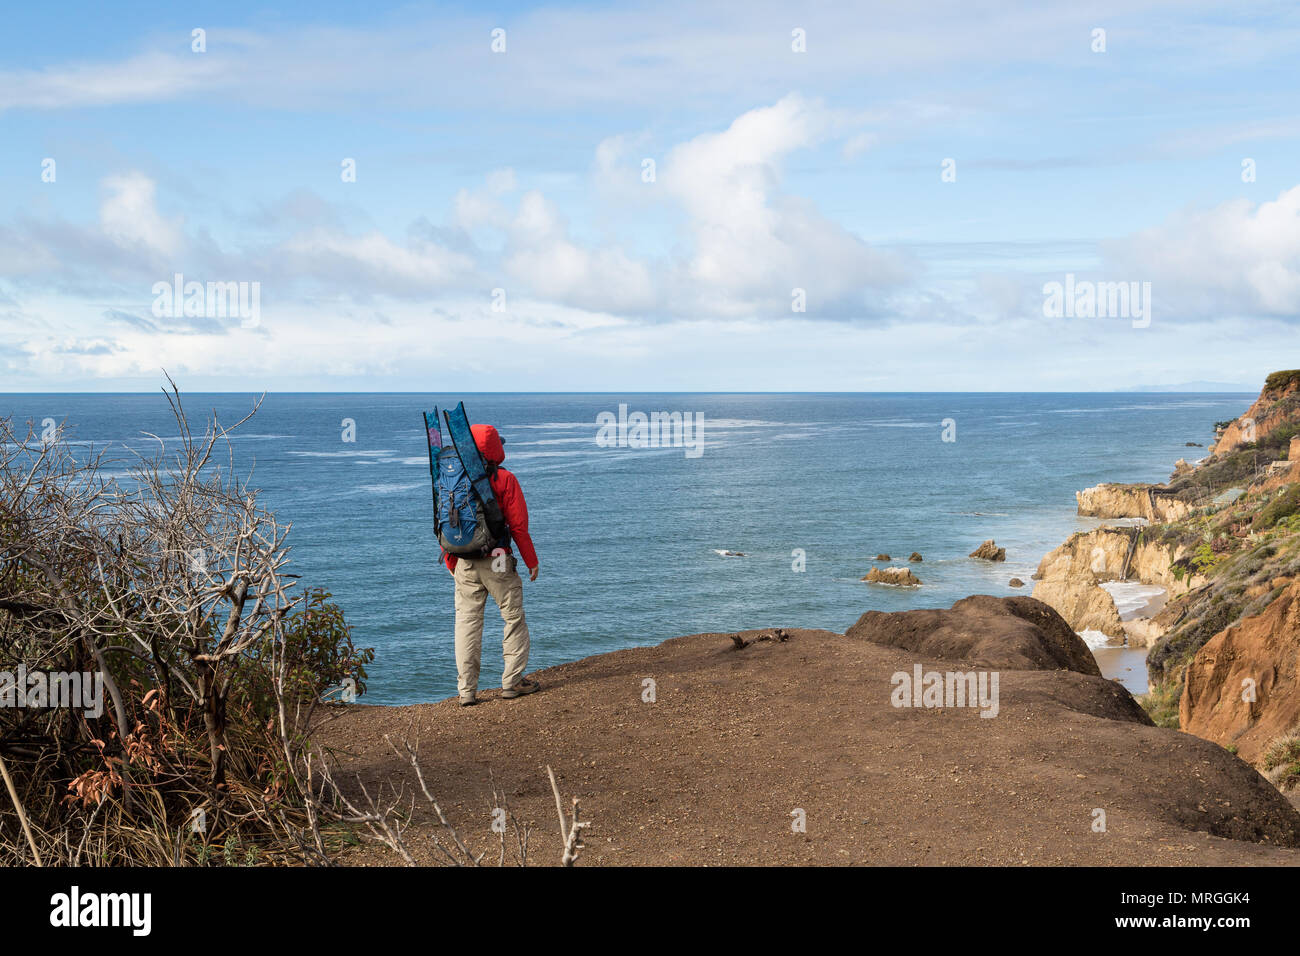 A freediver wearing a backpack ready for adventure stares out at the ocean from El Matador State Beach in Malibu, California. Stock Photo